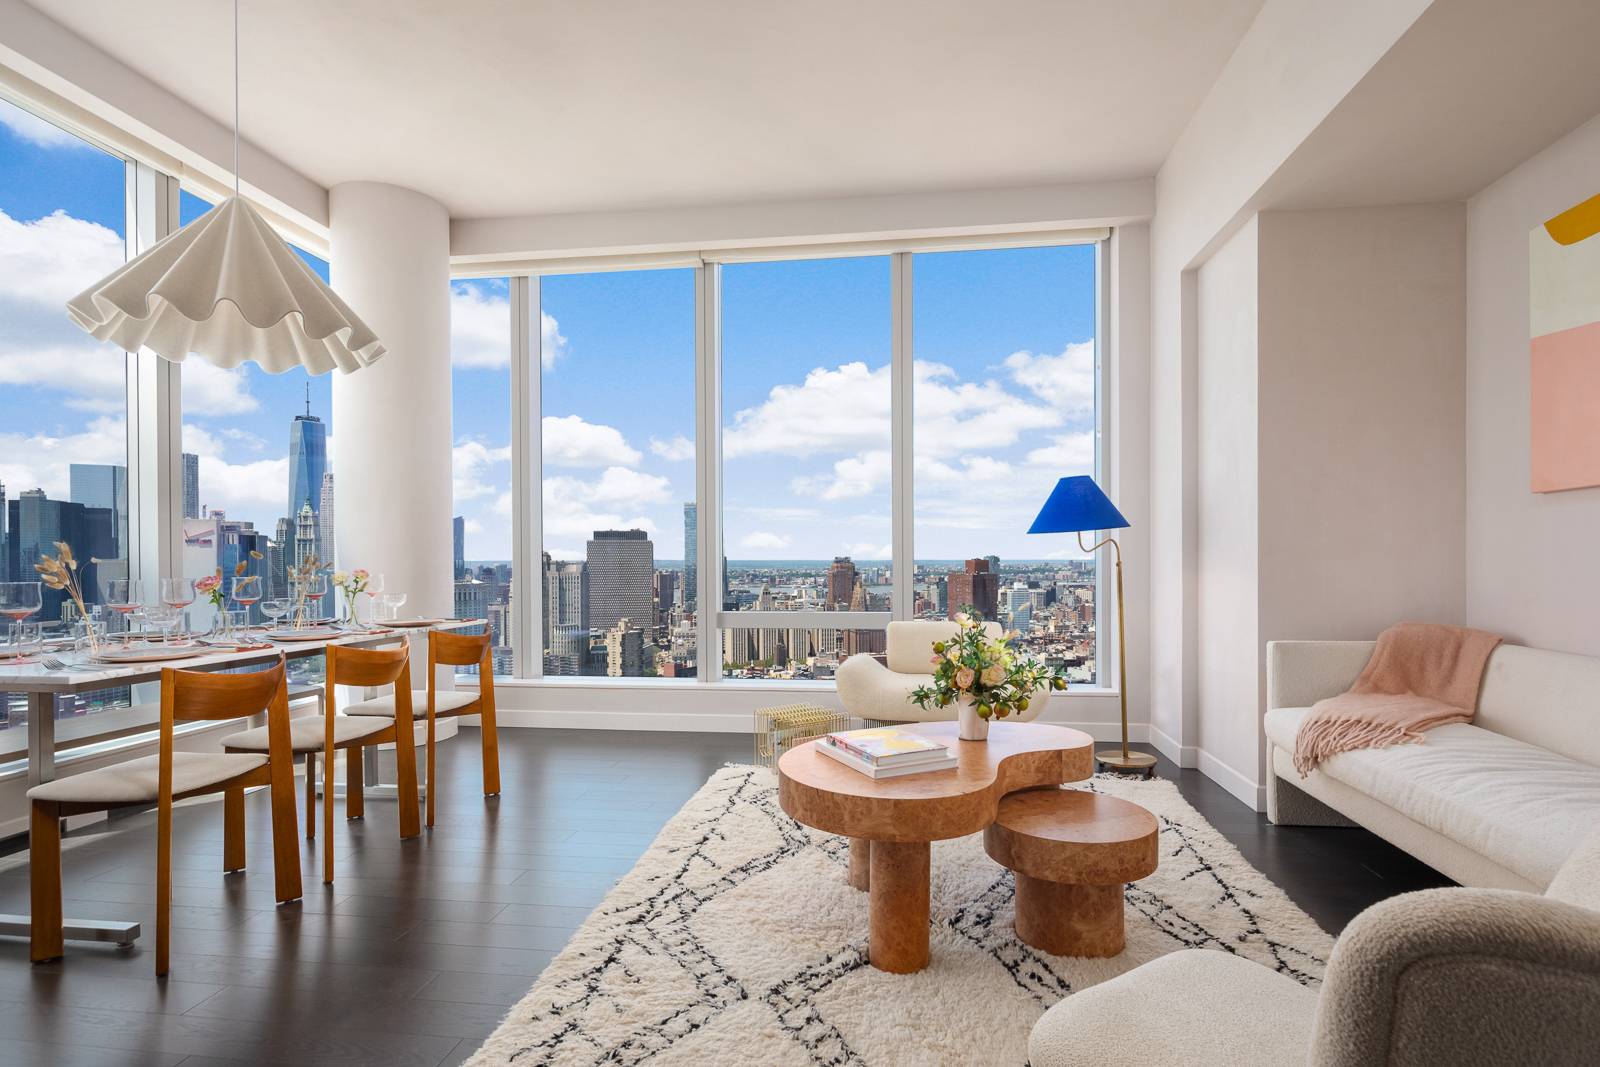 ONE MANHATTAN SQUARE OFFERS ONE OF THE LAST 20 YEAR TAX ABATEMENTS AVAILABLE IN NEW YORK CITY Residence 59A is a 1, 667 square foot three bedroom, three bathroom with ...